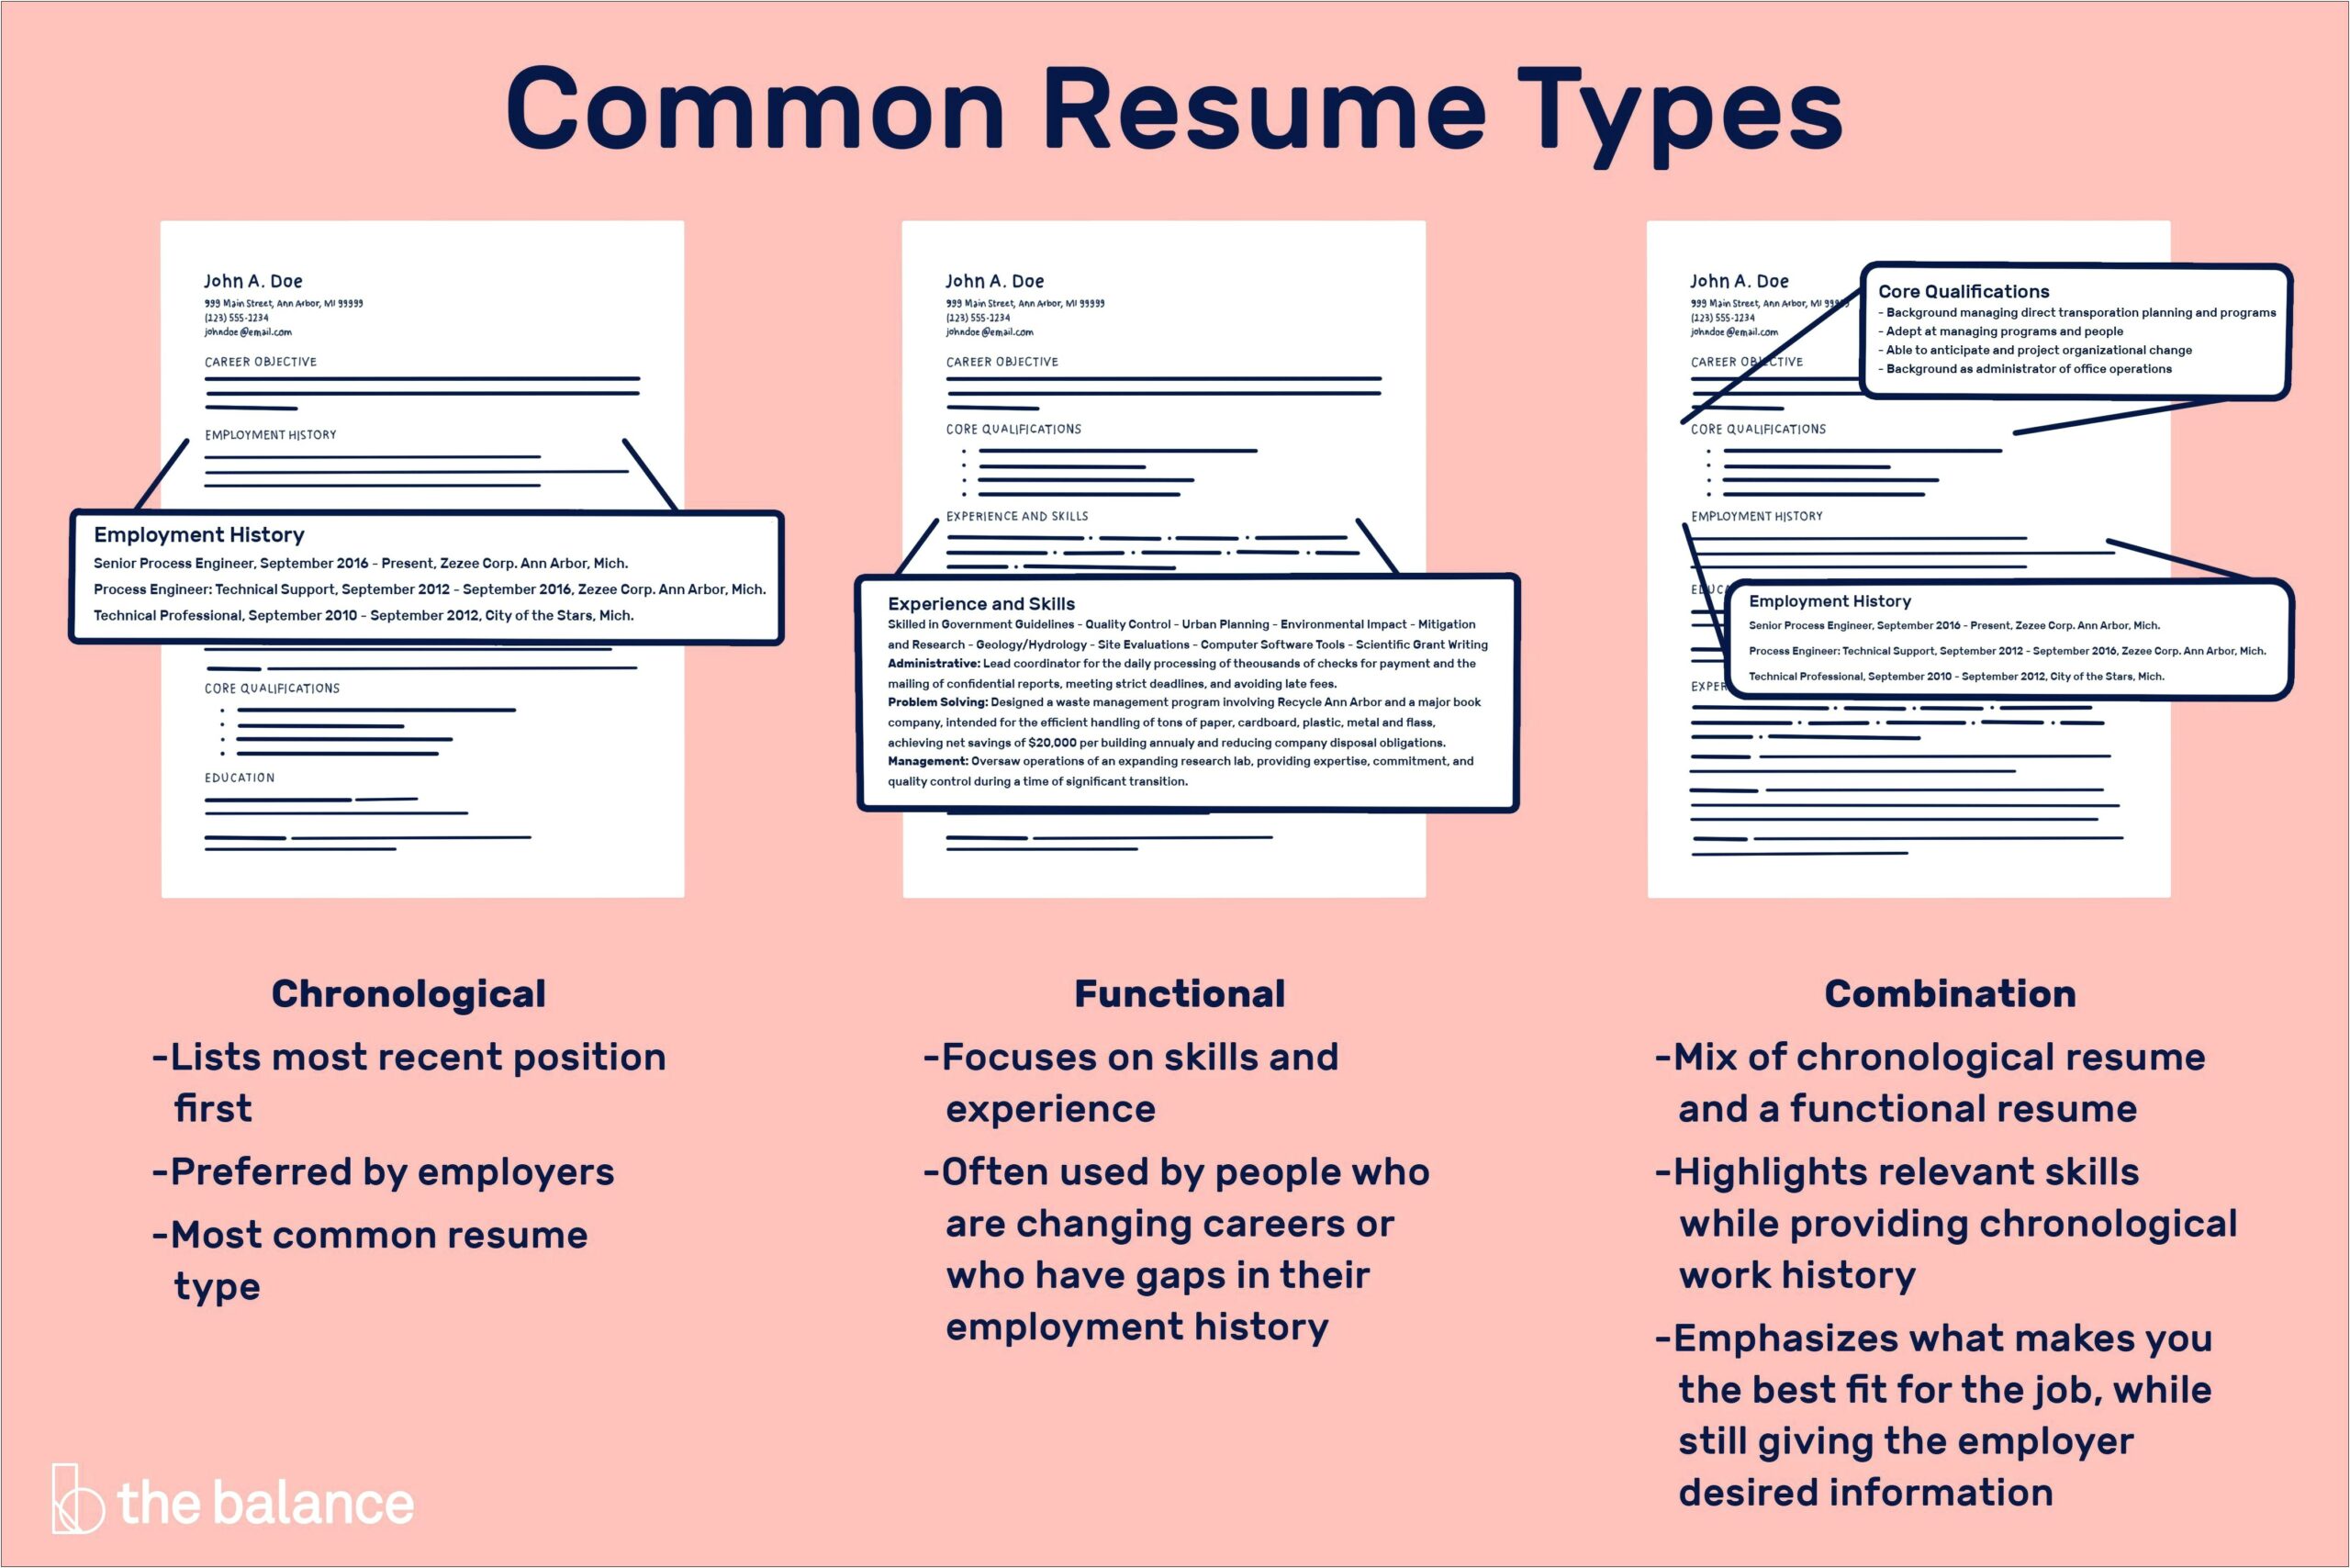 Compare Resume To Job Opening